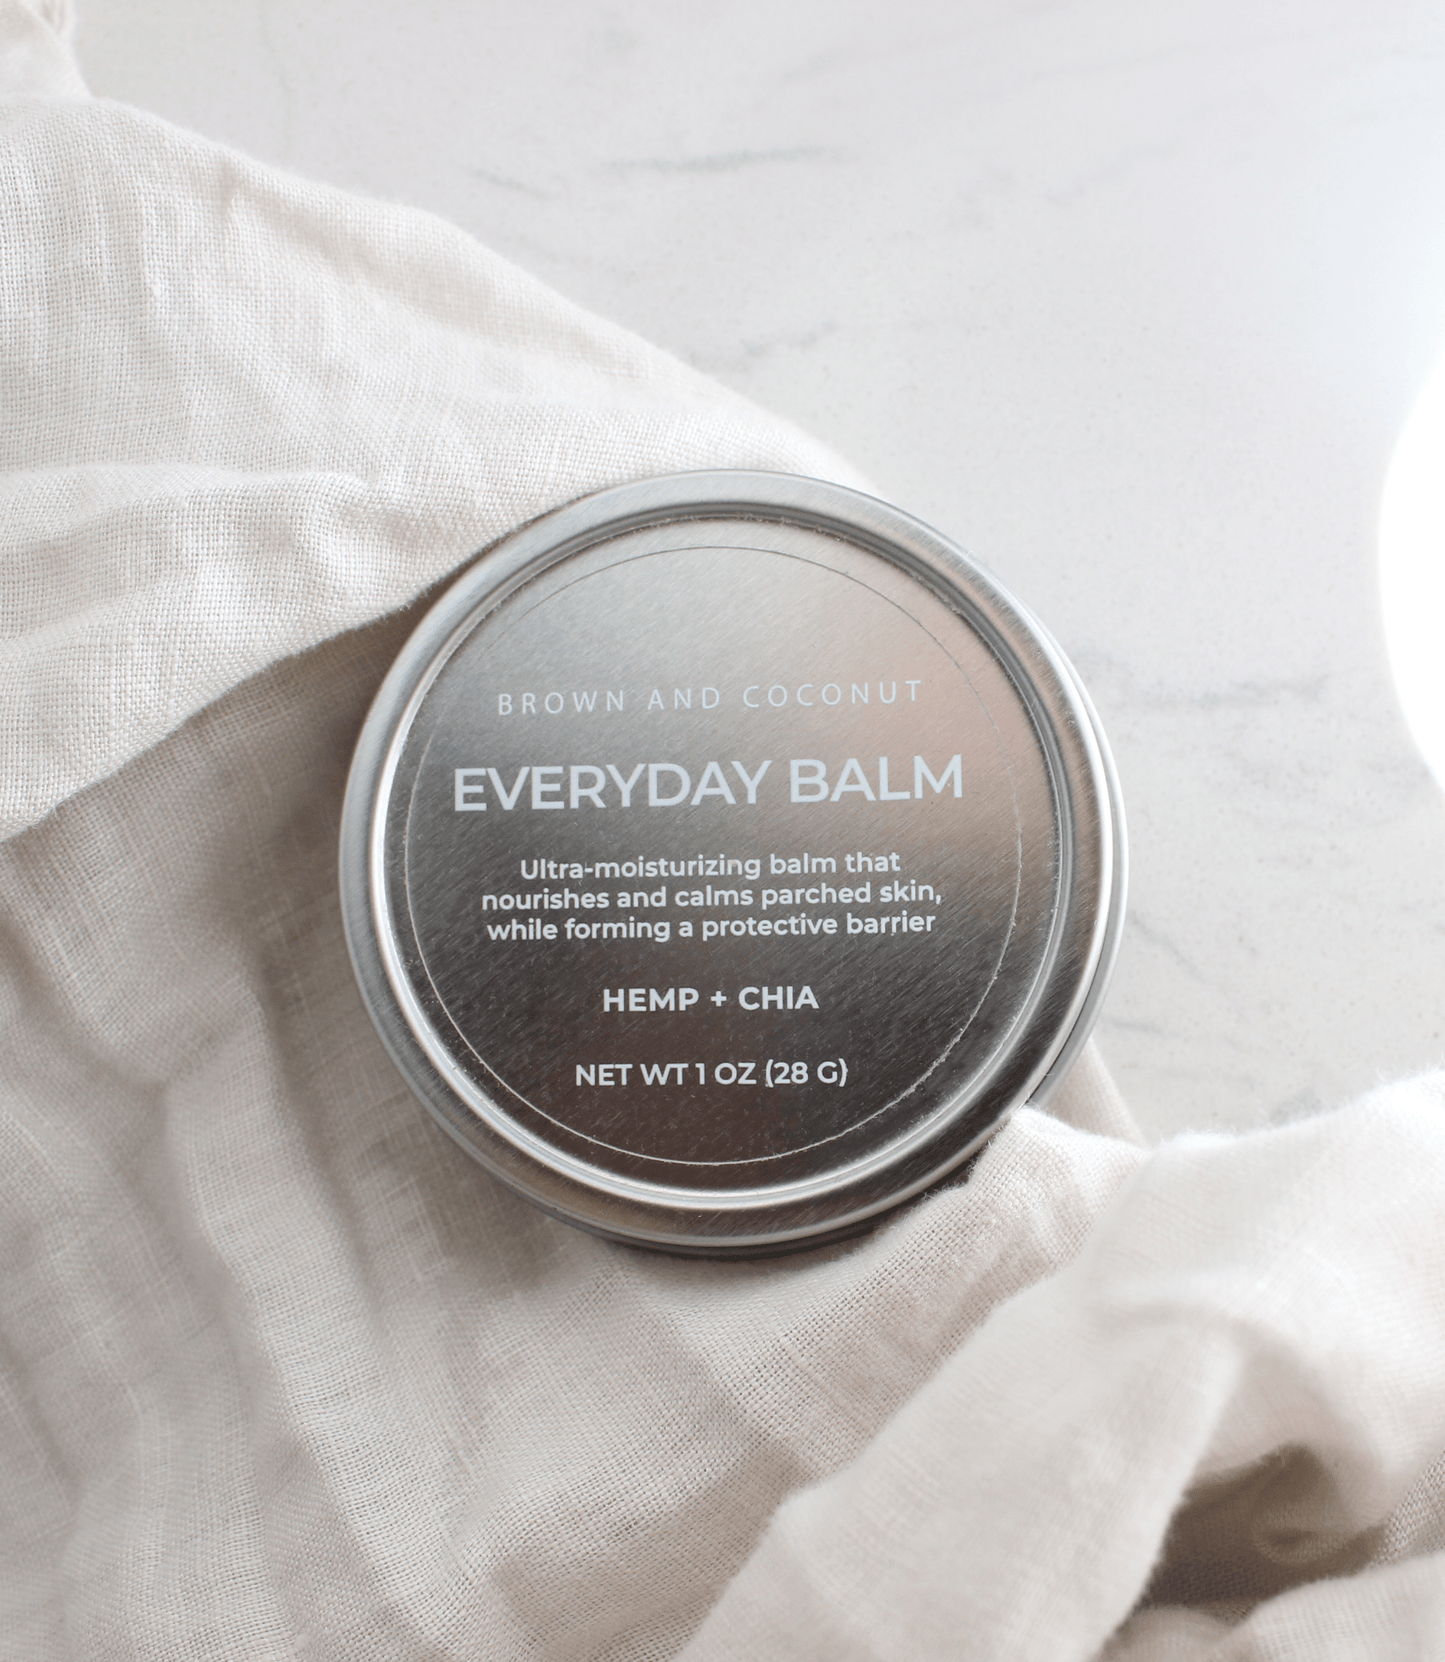 NEW Everyday Balm - Brown and Coconut